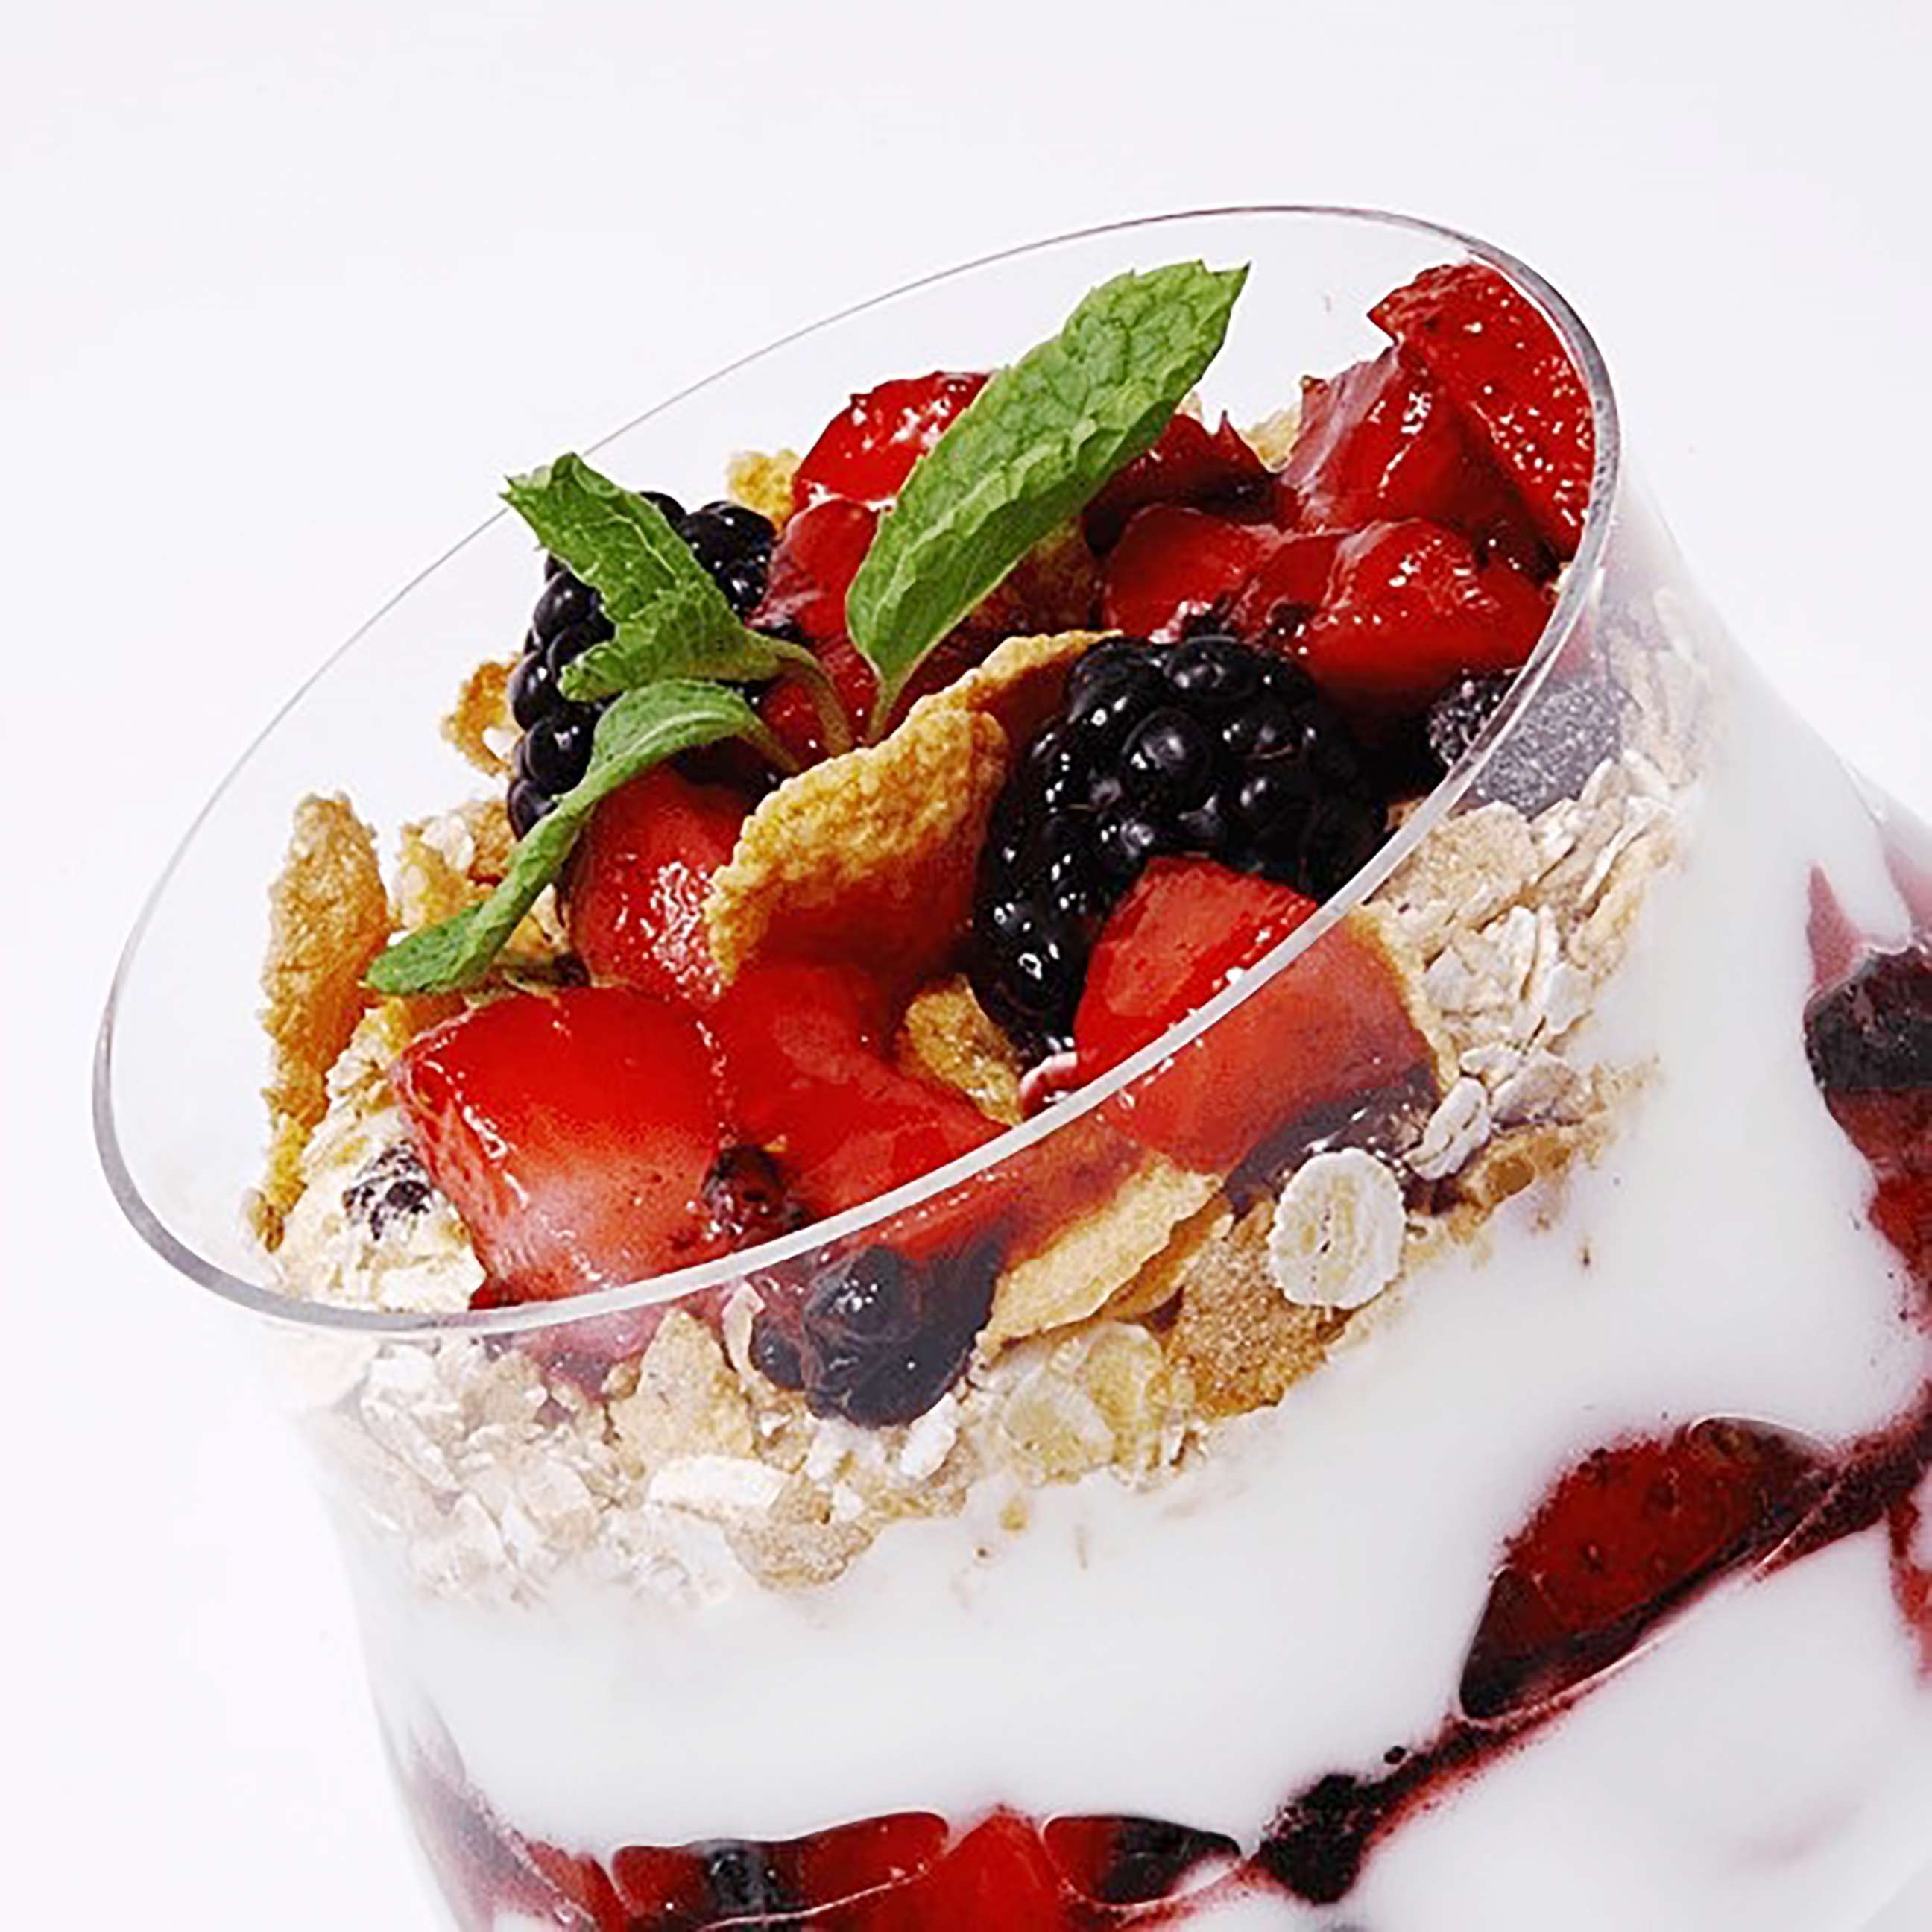 PHOTO: Celebrity trainer Jeannette Jenkins shared a recipe for Greek yogurt with berries and granola.